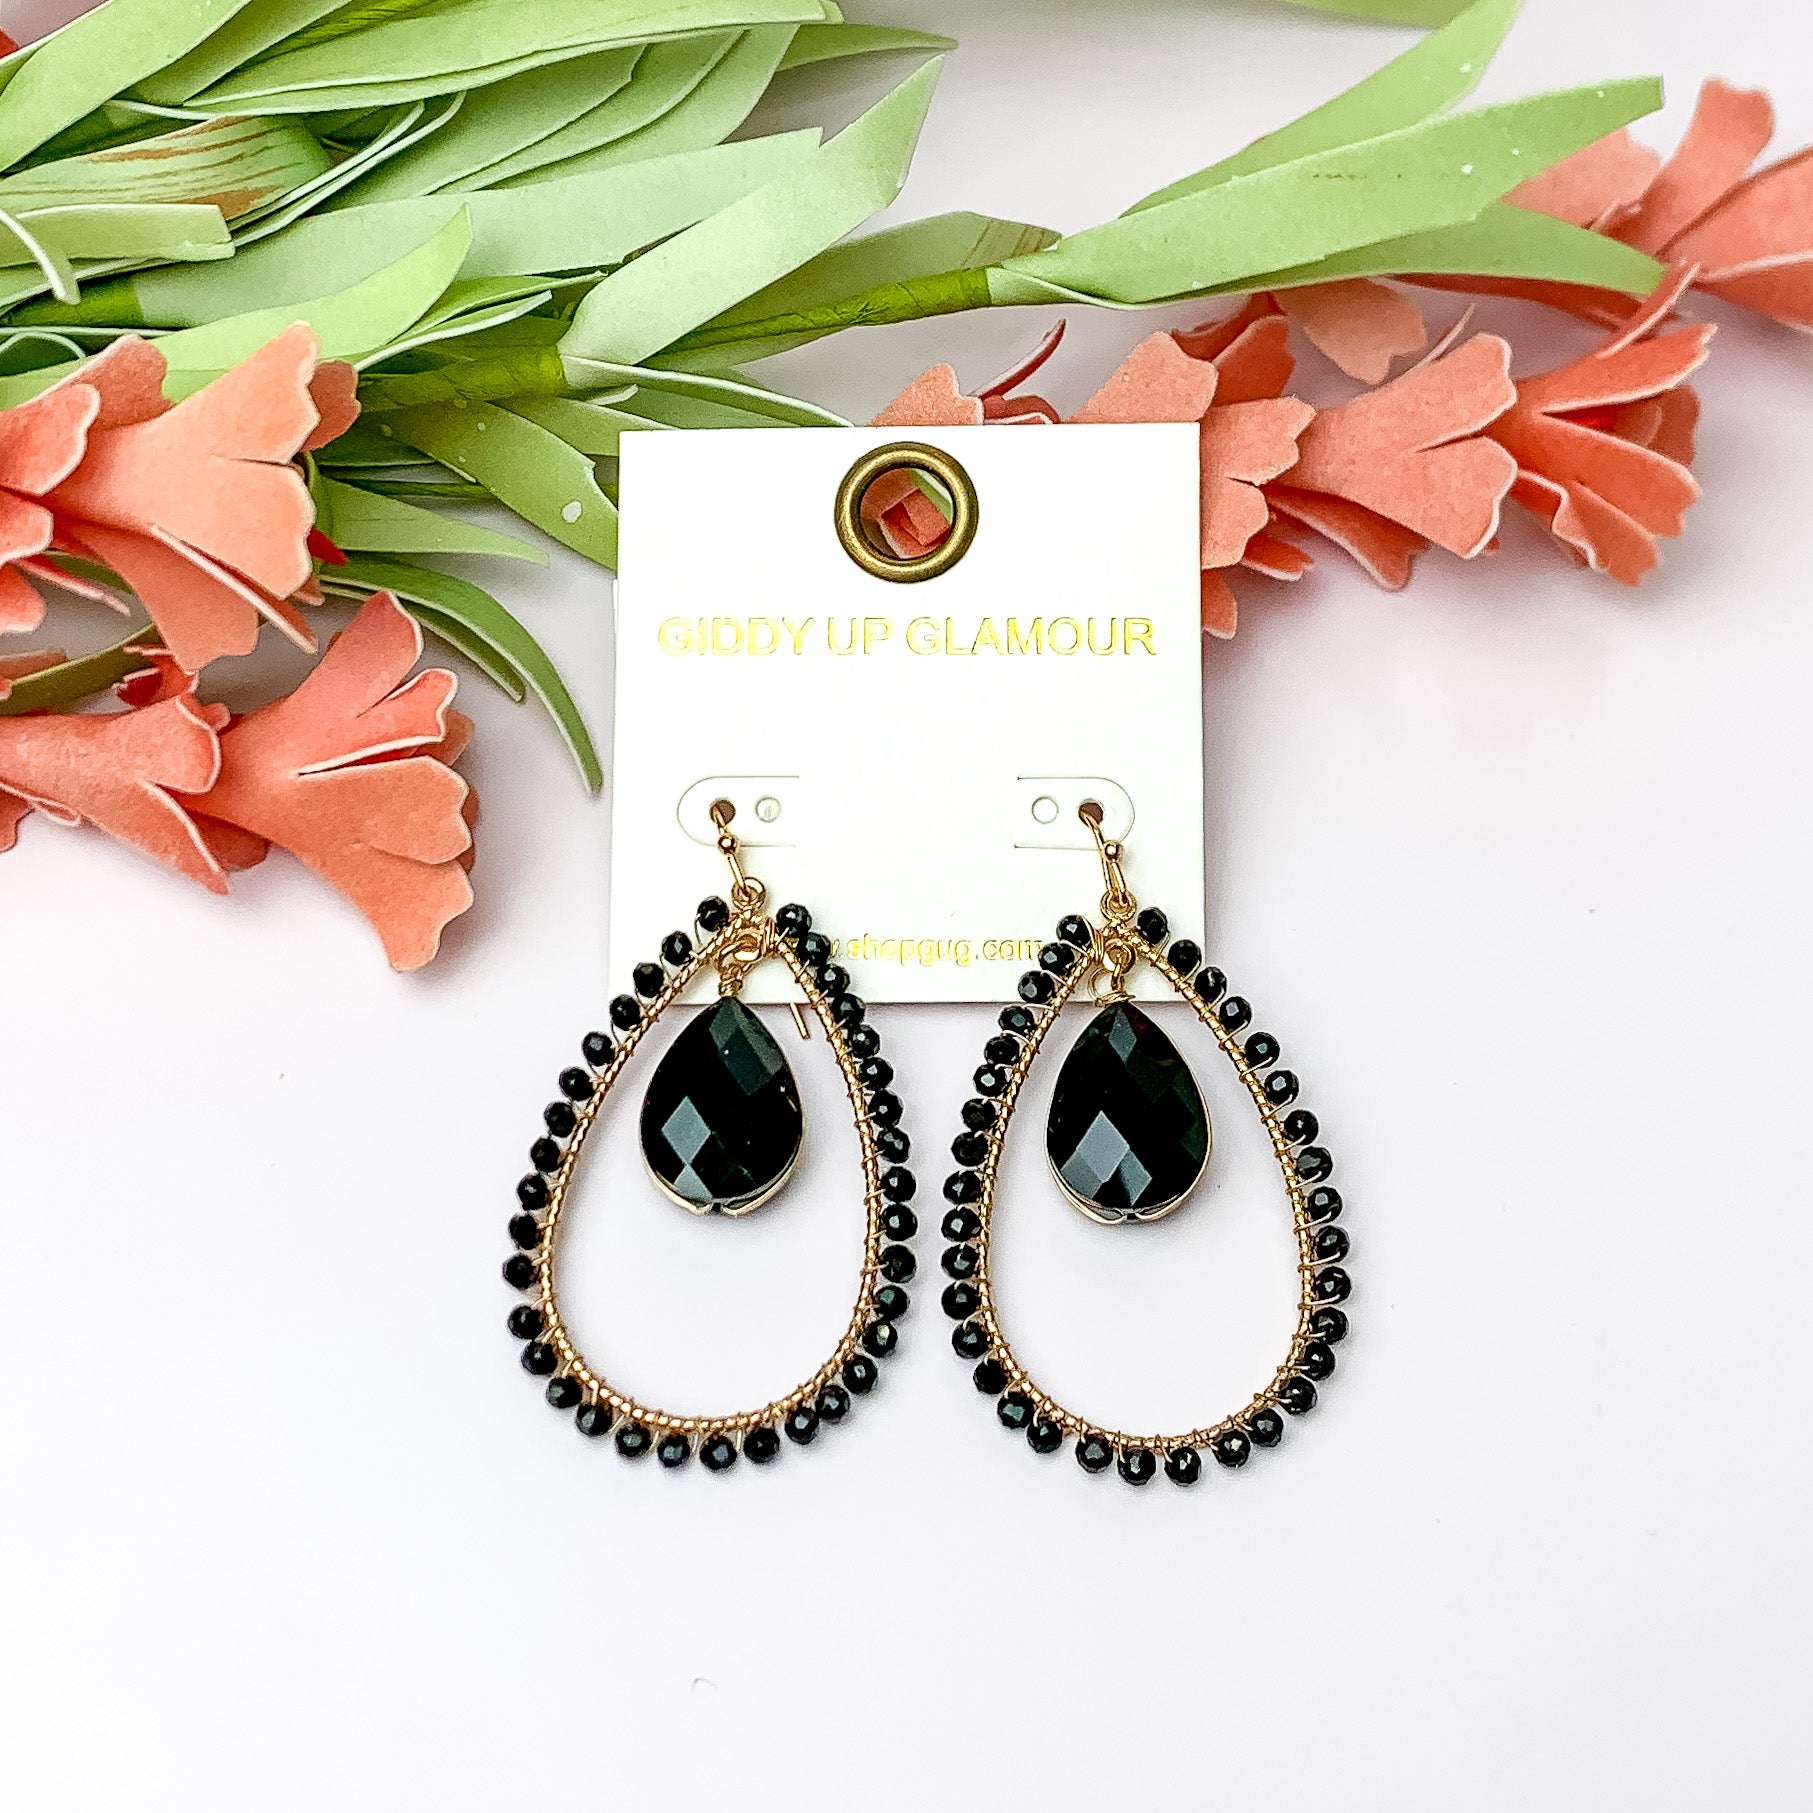 Black Stone Inside Open Beaded Teardrop Earrings with Gold Tone Outline. Pictured on a white background with flowers at the top.